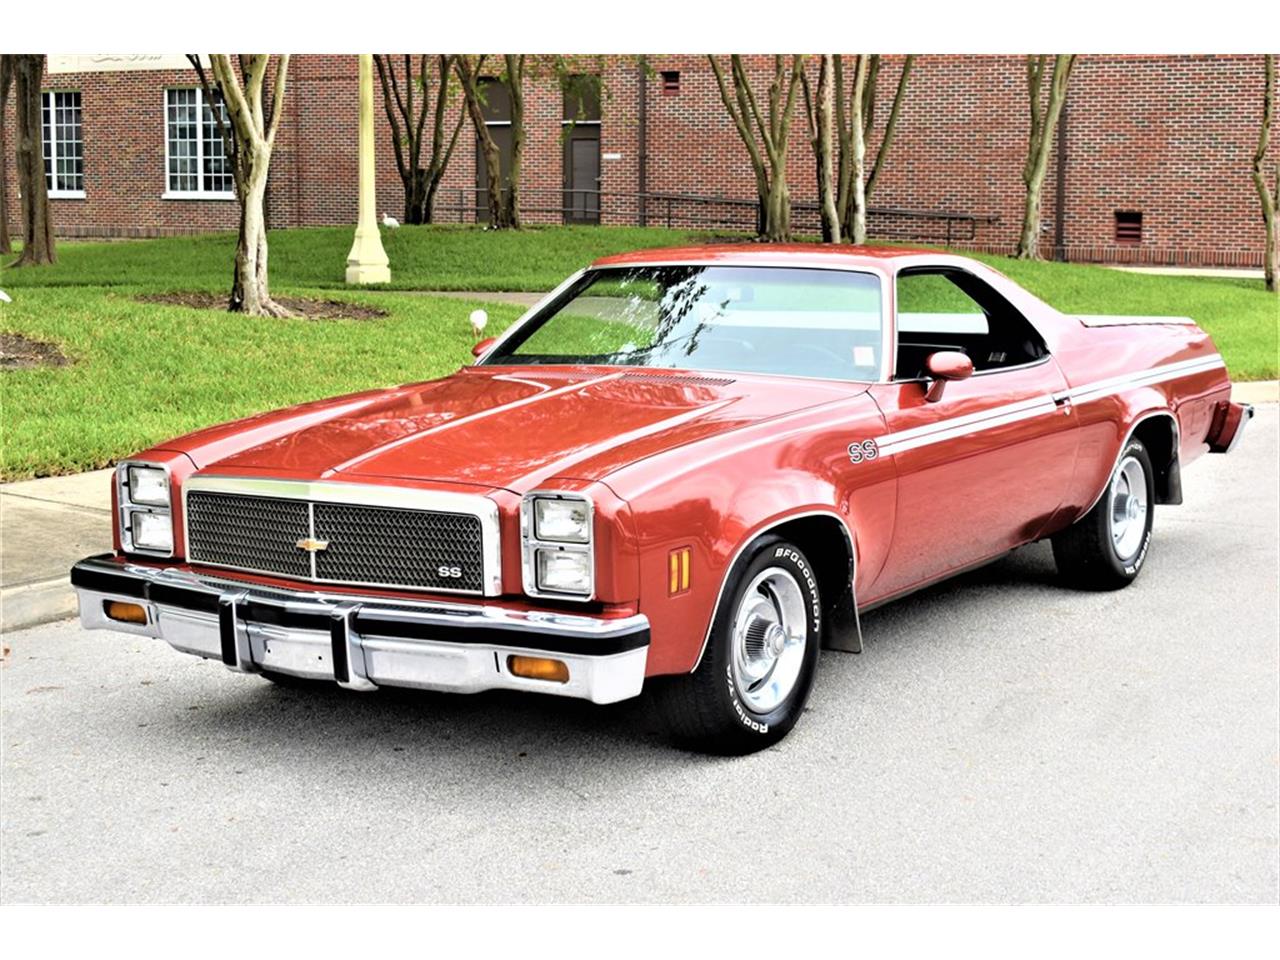 1976 chevrolet el camino ss for sale classiccars com cc 1270775 1976 chevrolet el camino ss for sale